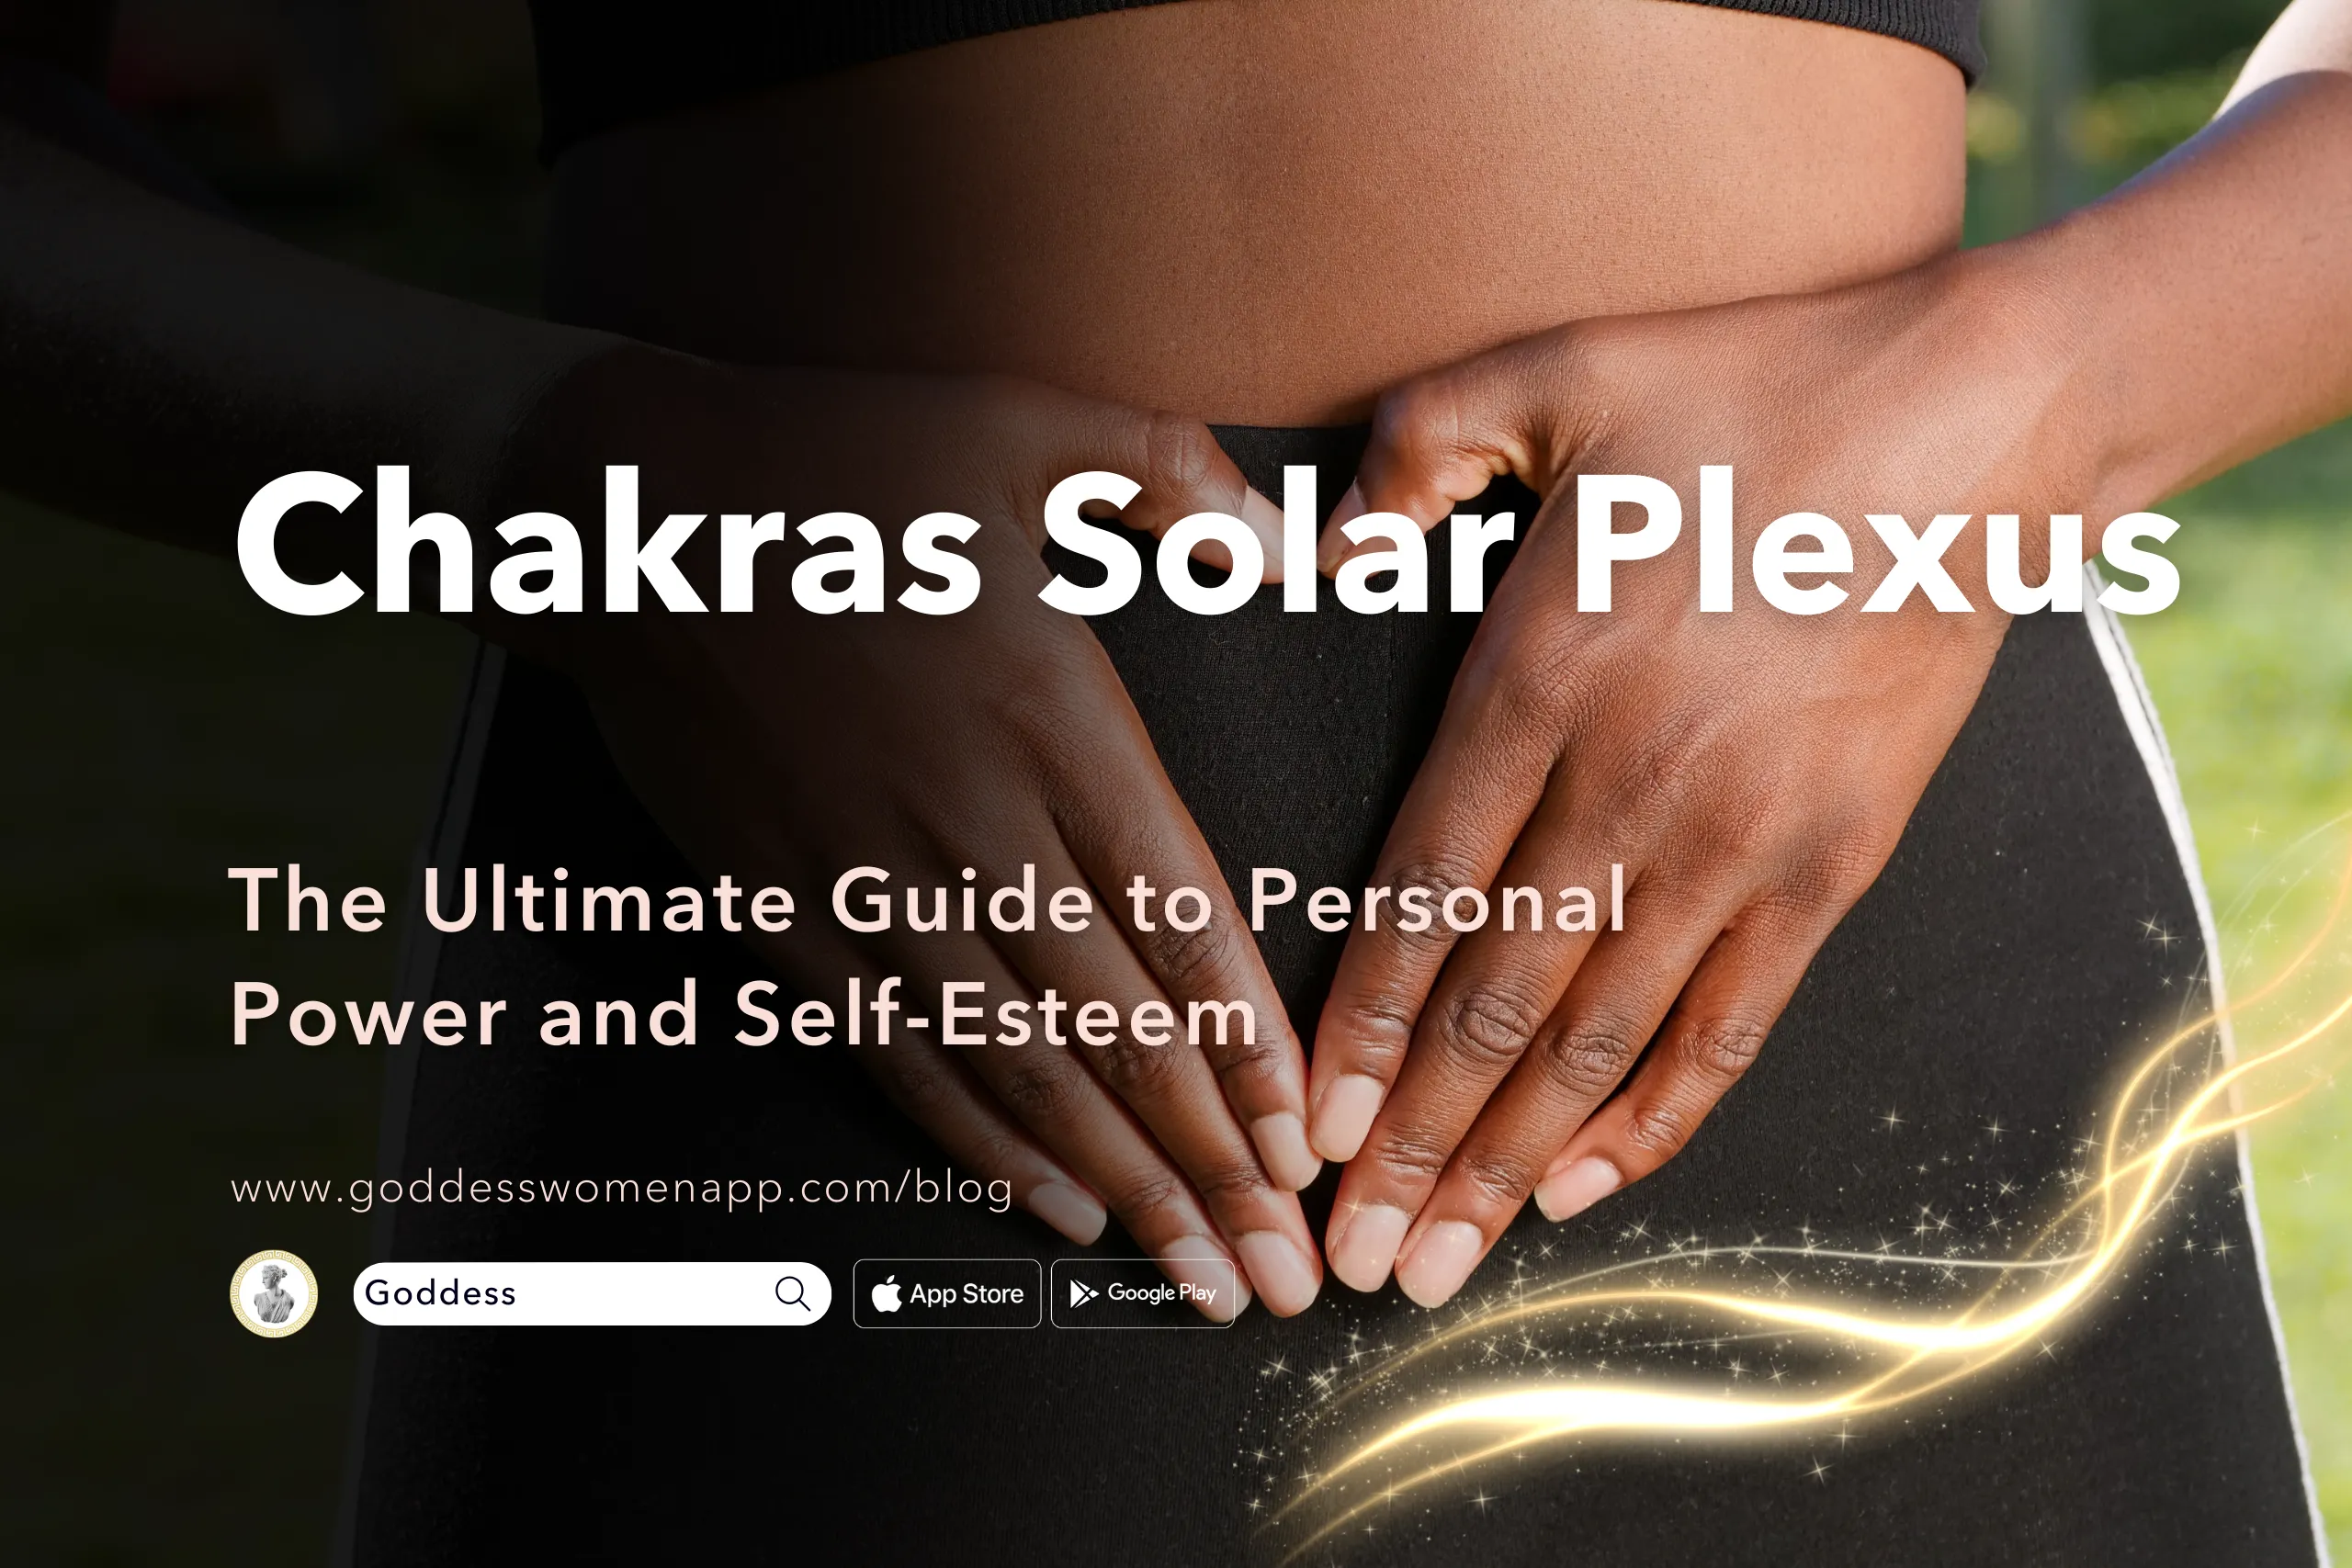 Chakras Solar Plexus: The Ultimate Guide to Personal Power and Self-Esteem